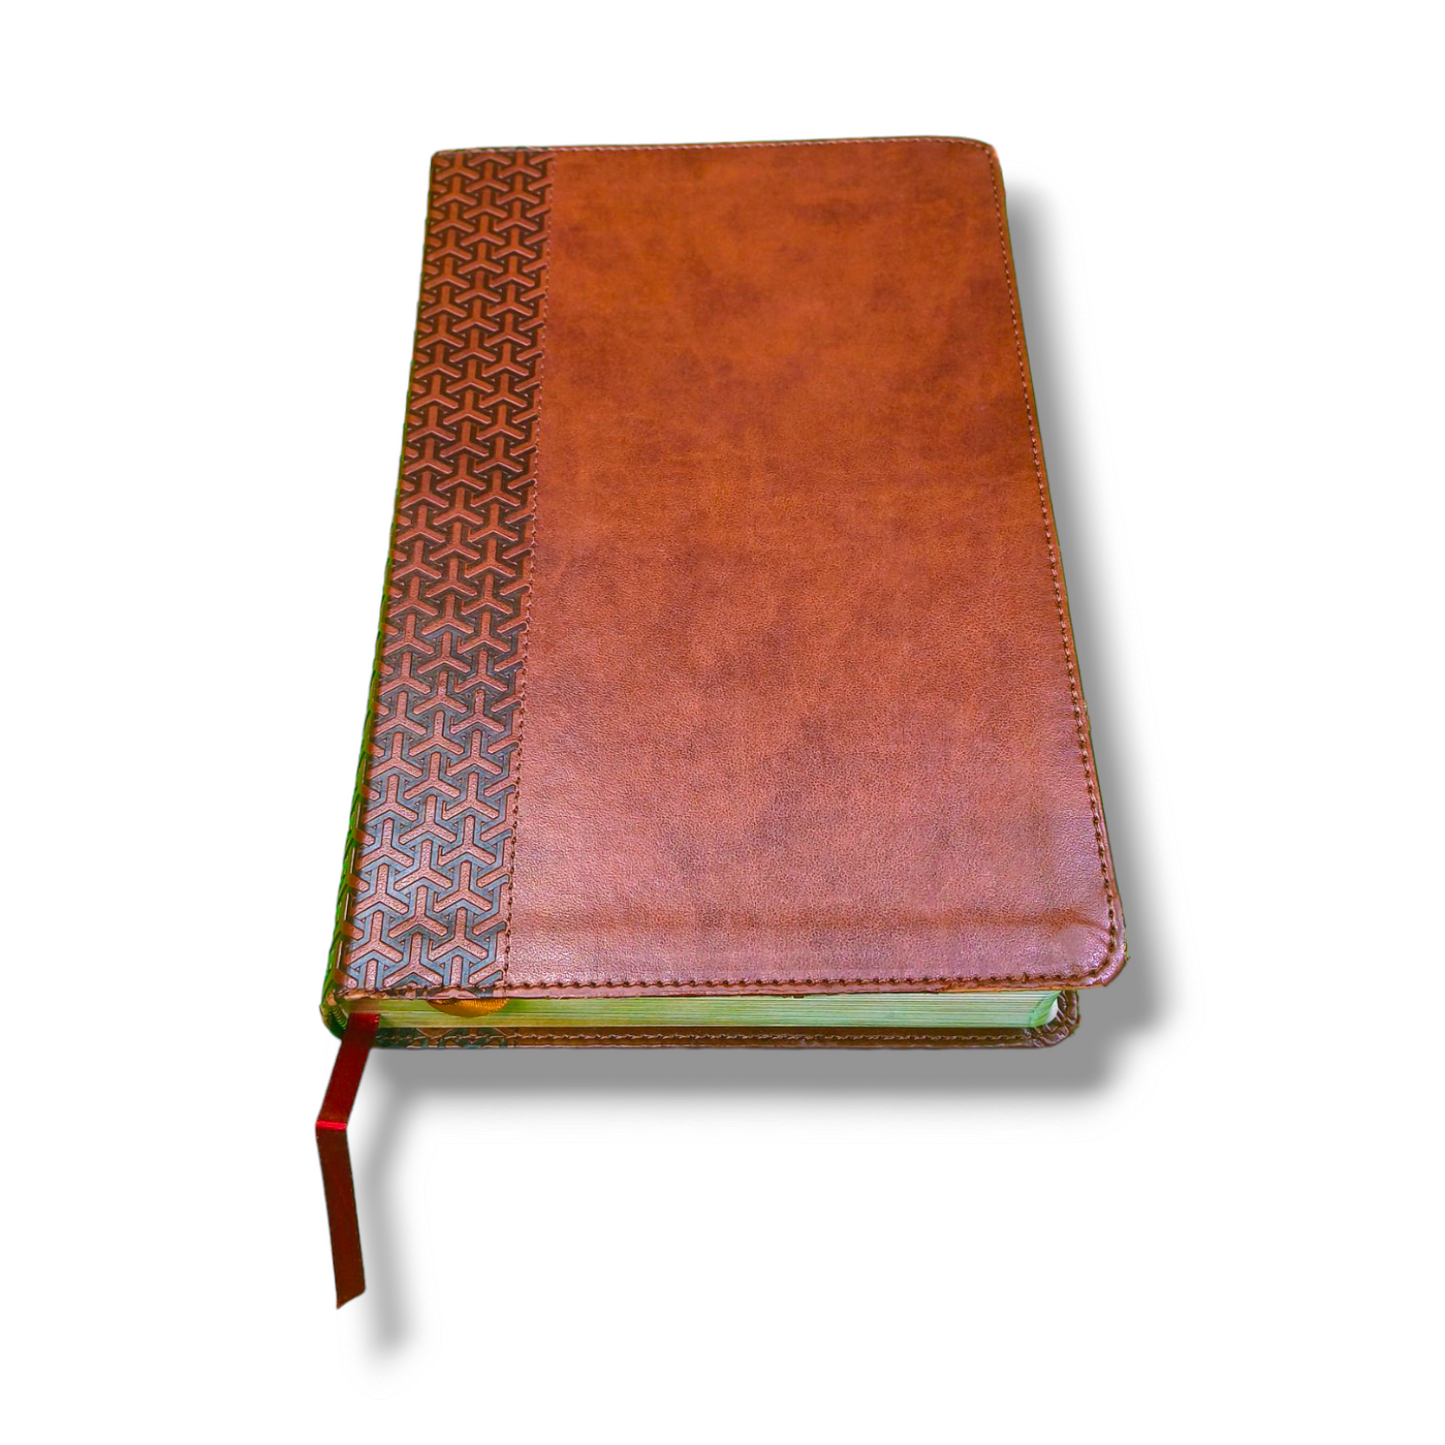 KJV Everyday Study Bible | Imitation Attractive Deign Brown Leather Edition | New Edition